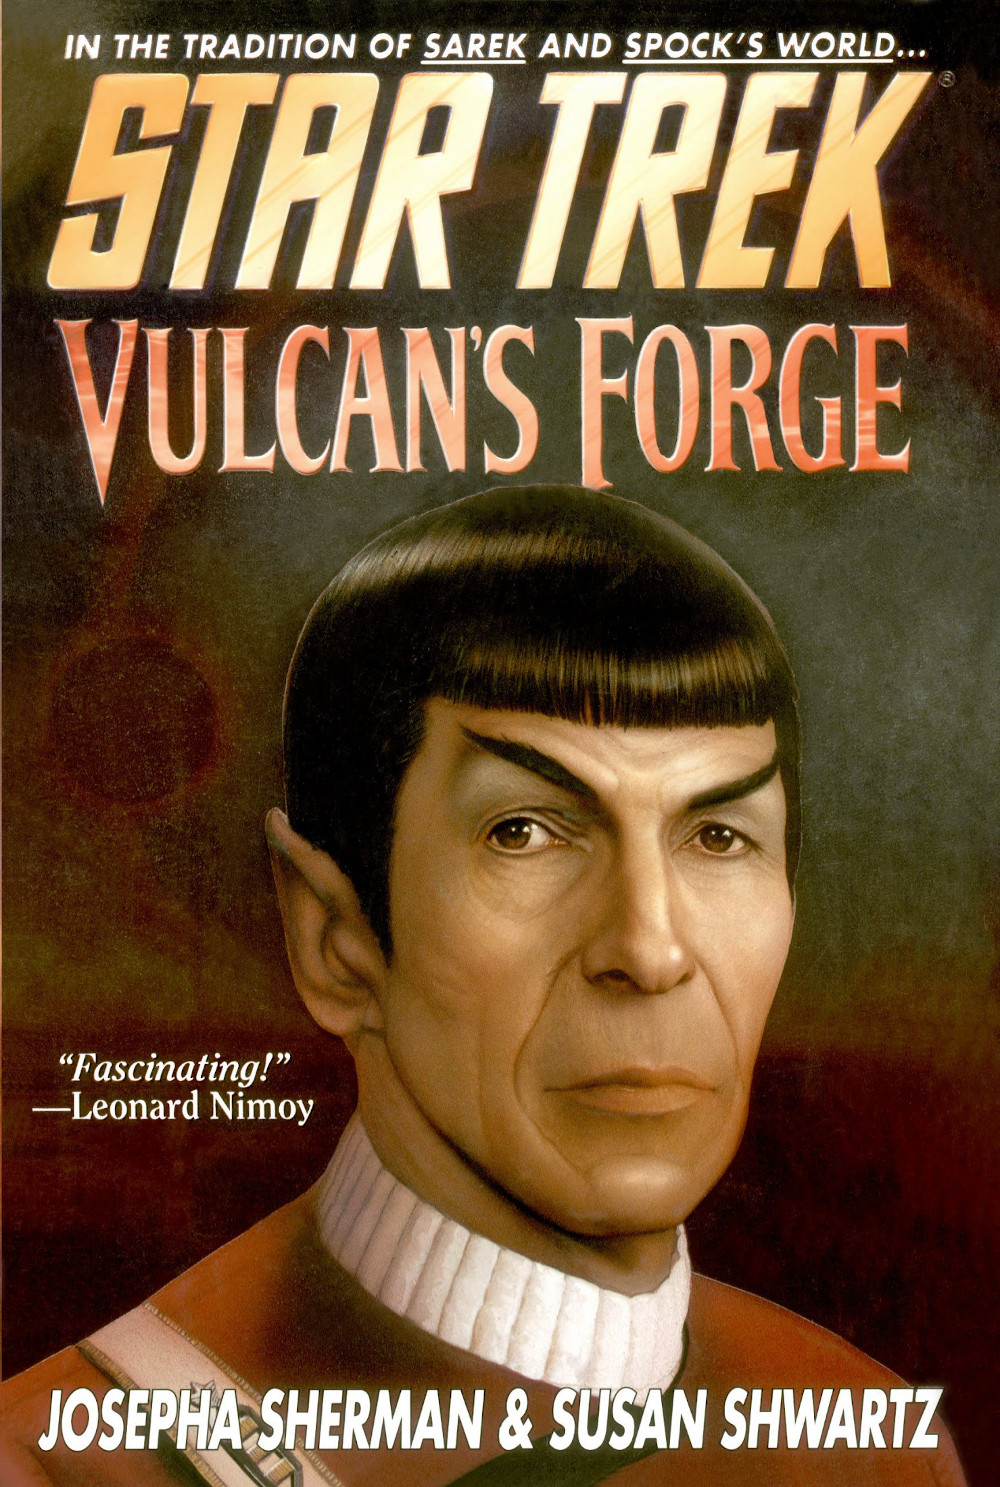 Vulcan's Forge (Aug 1997)